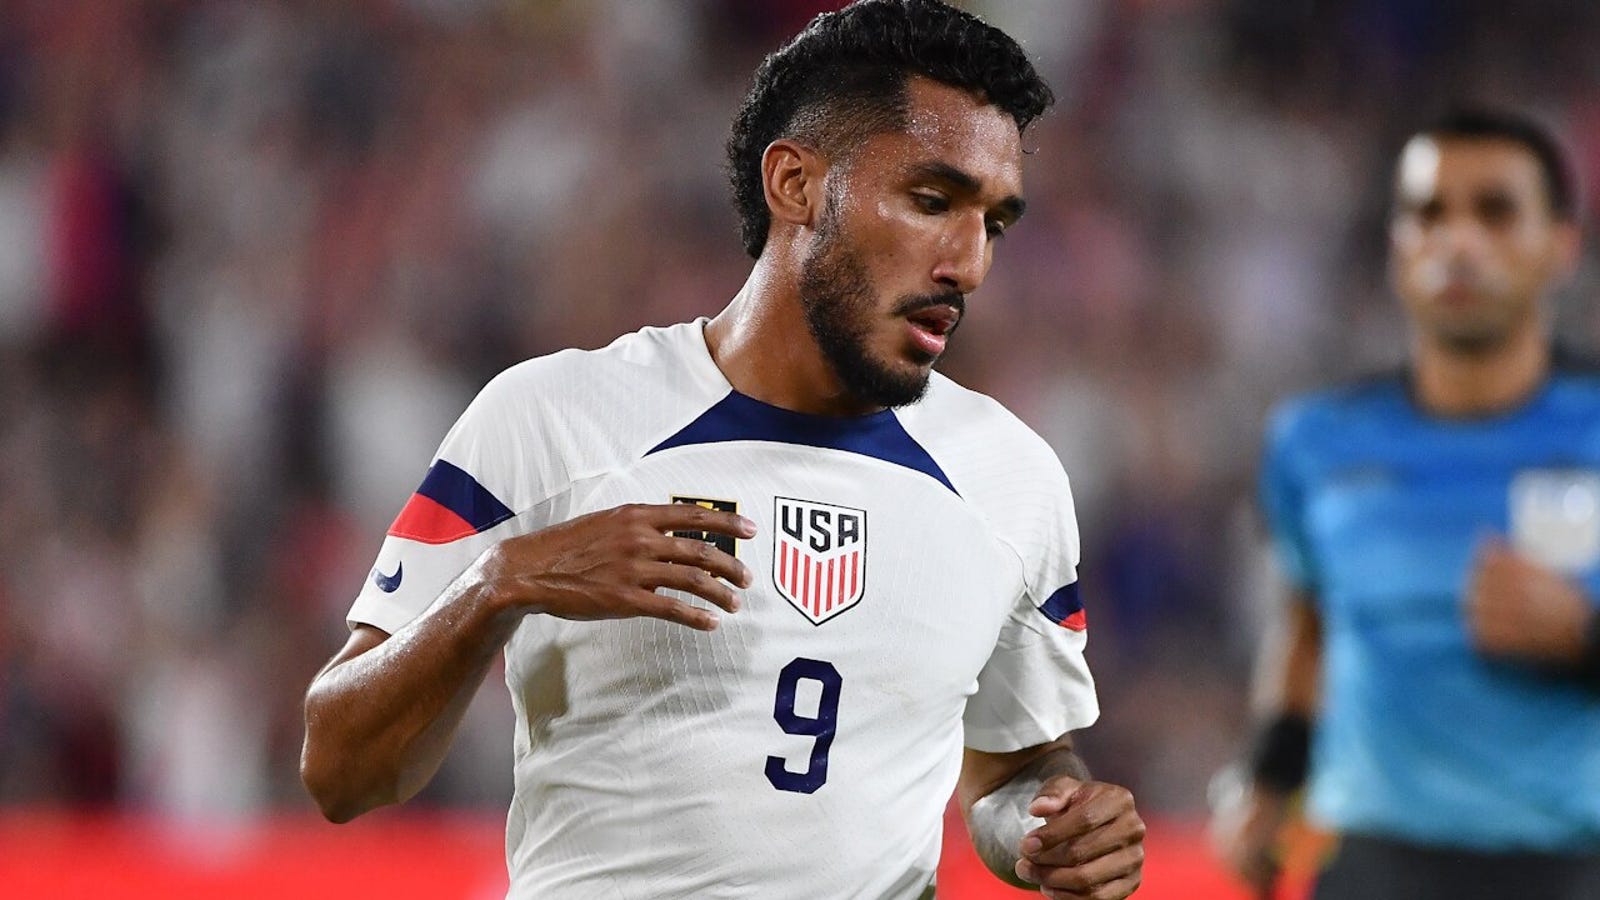 Jesús Ferreira scored the ultimate hat trick to lead USMNT to victory against Saint Kitts & Nevis